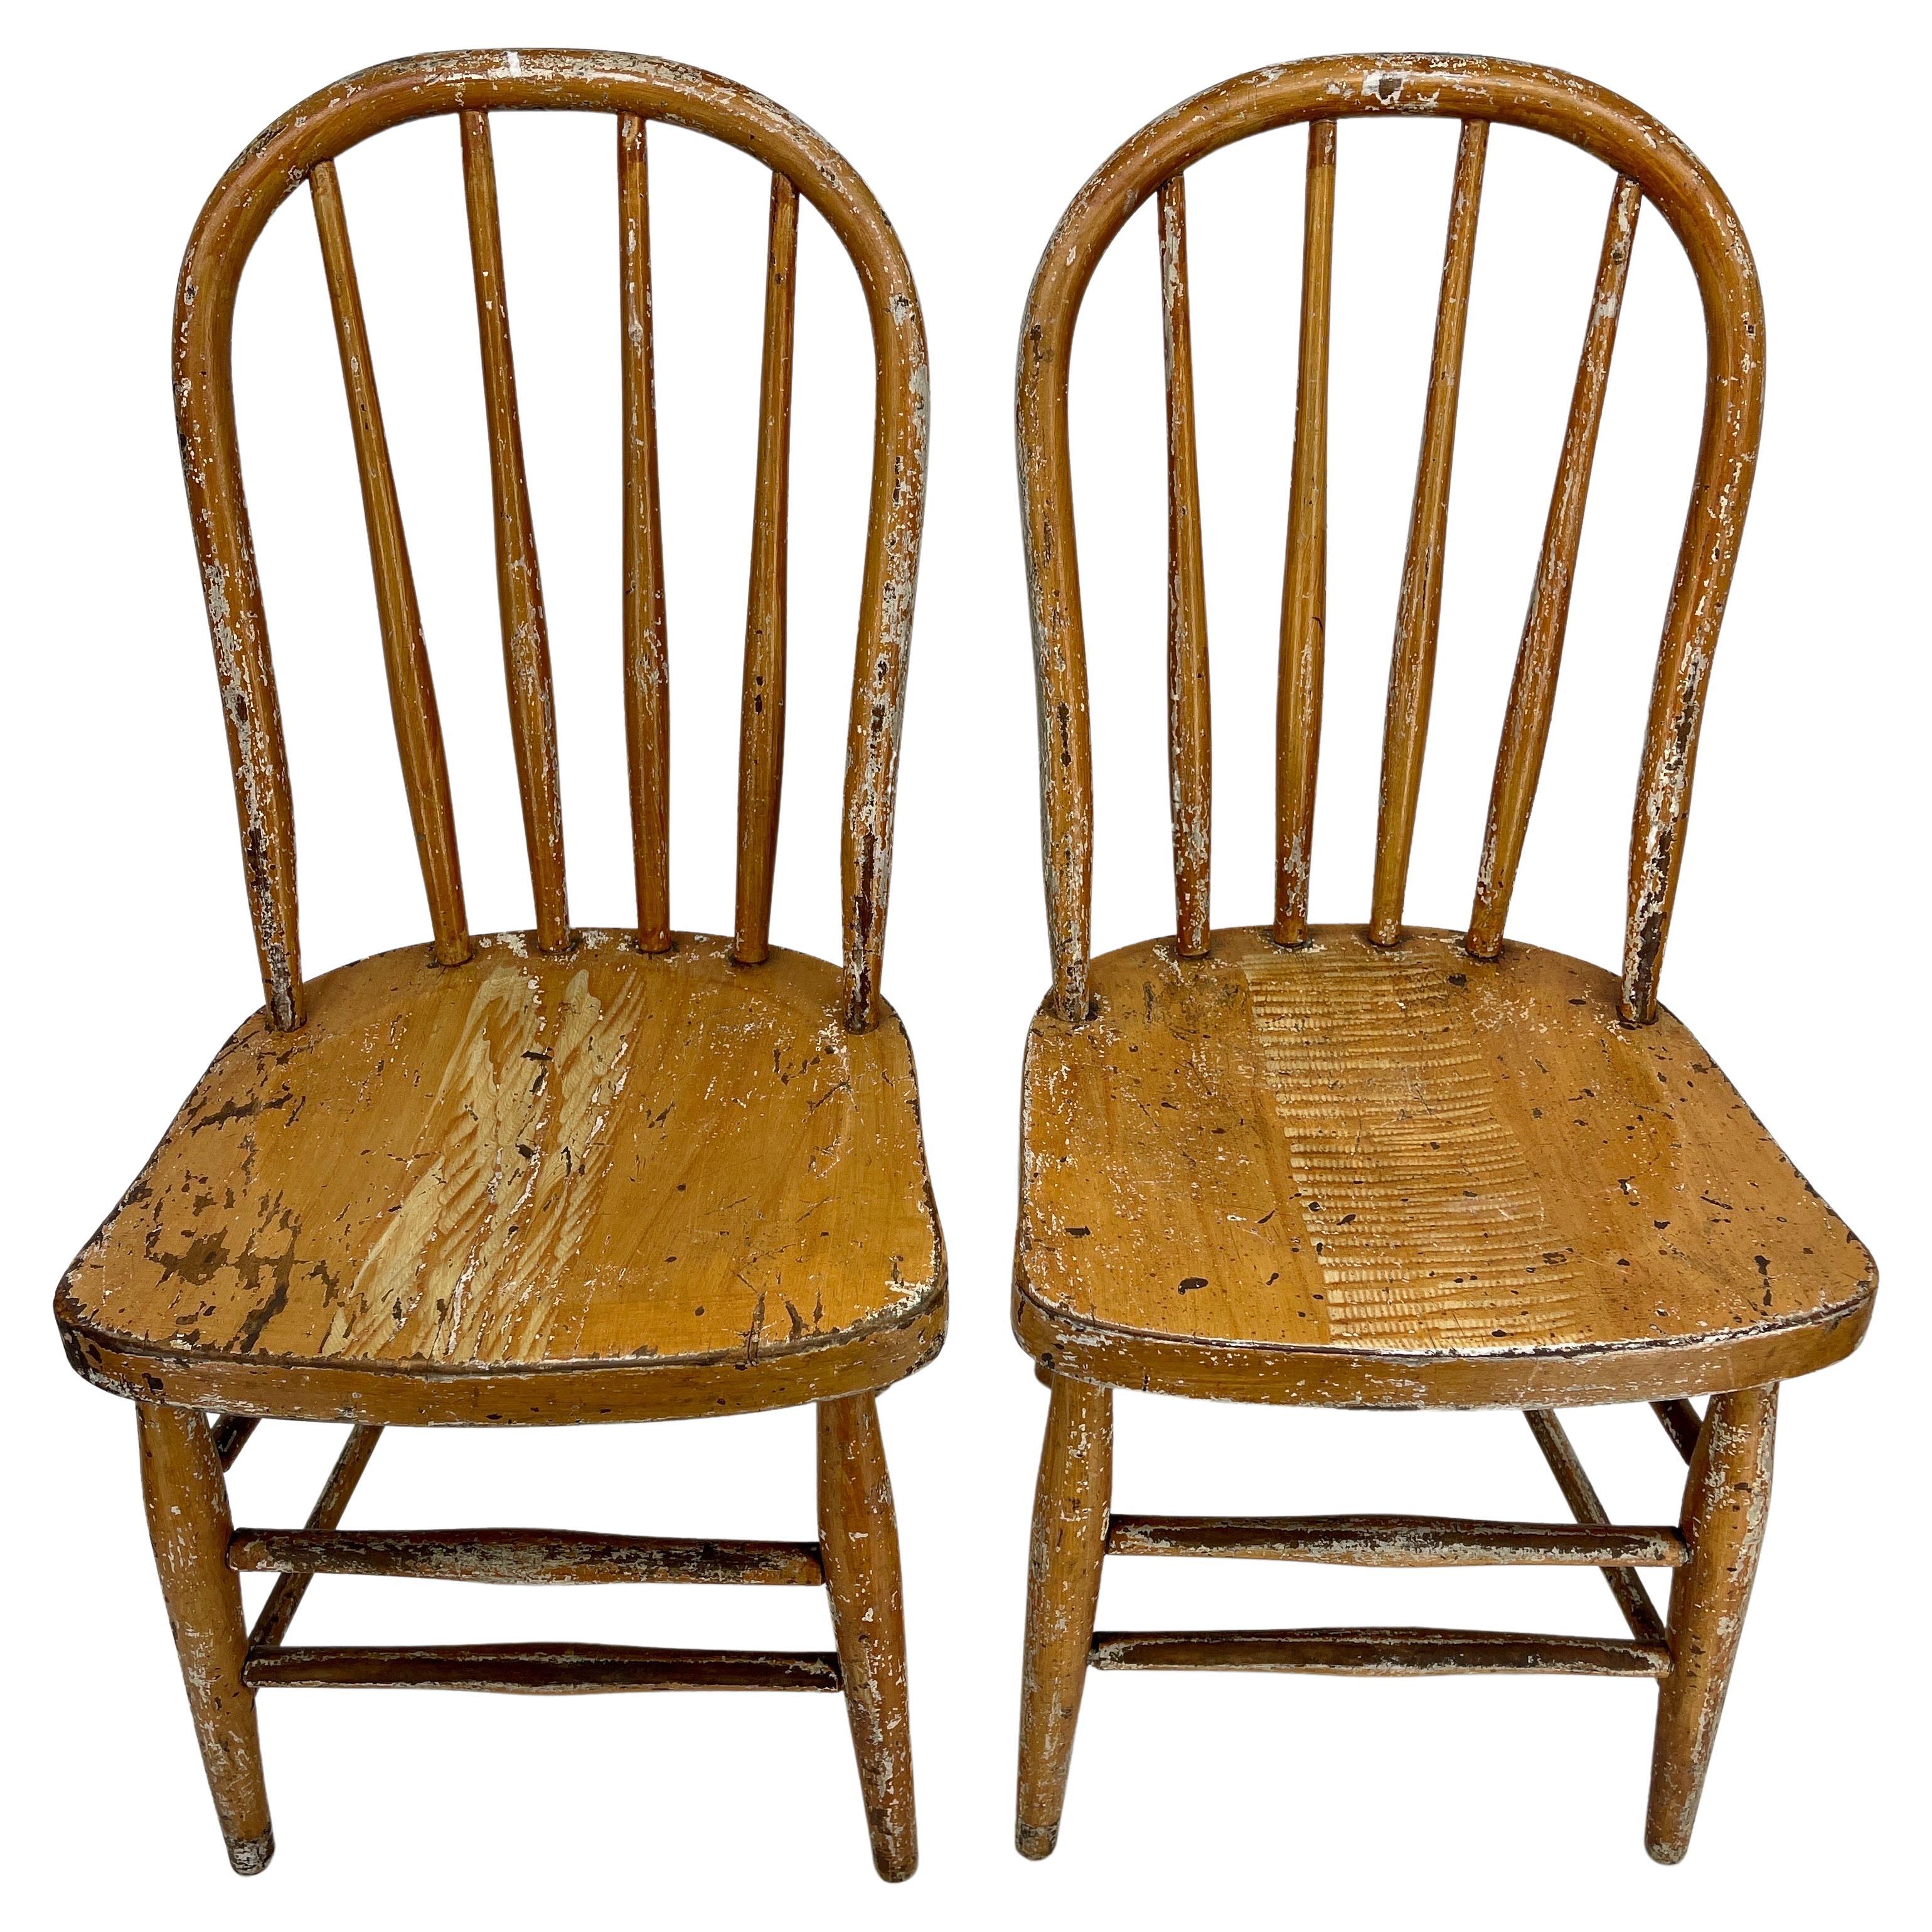 Pair of Small Early Painted Folk Art Chairs or Side Tables In Good Condition For Sale In Haddonfield, NJ